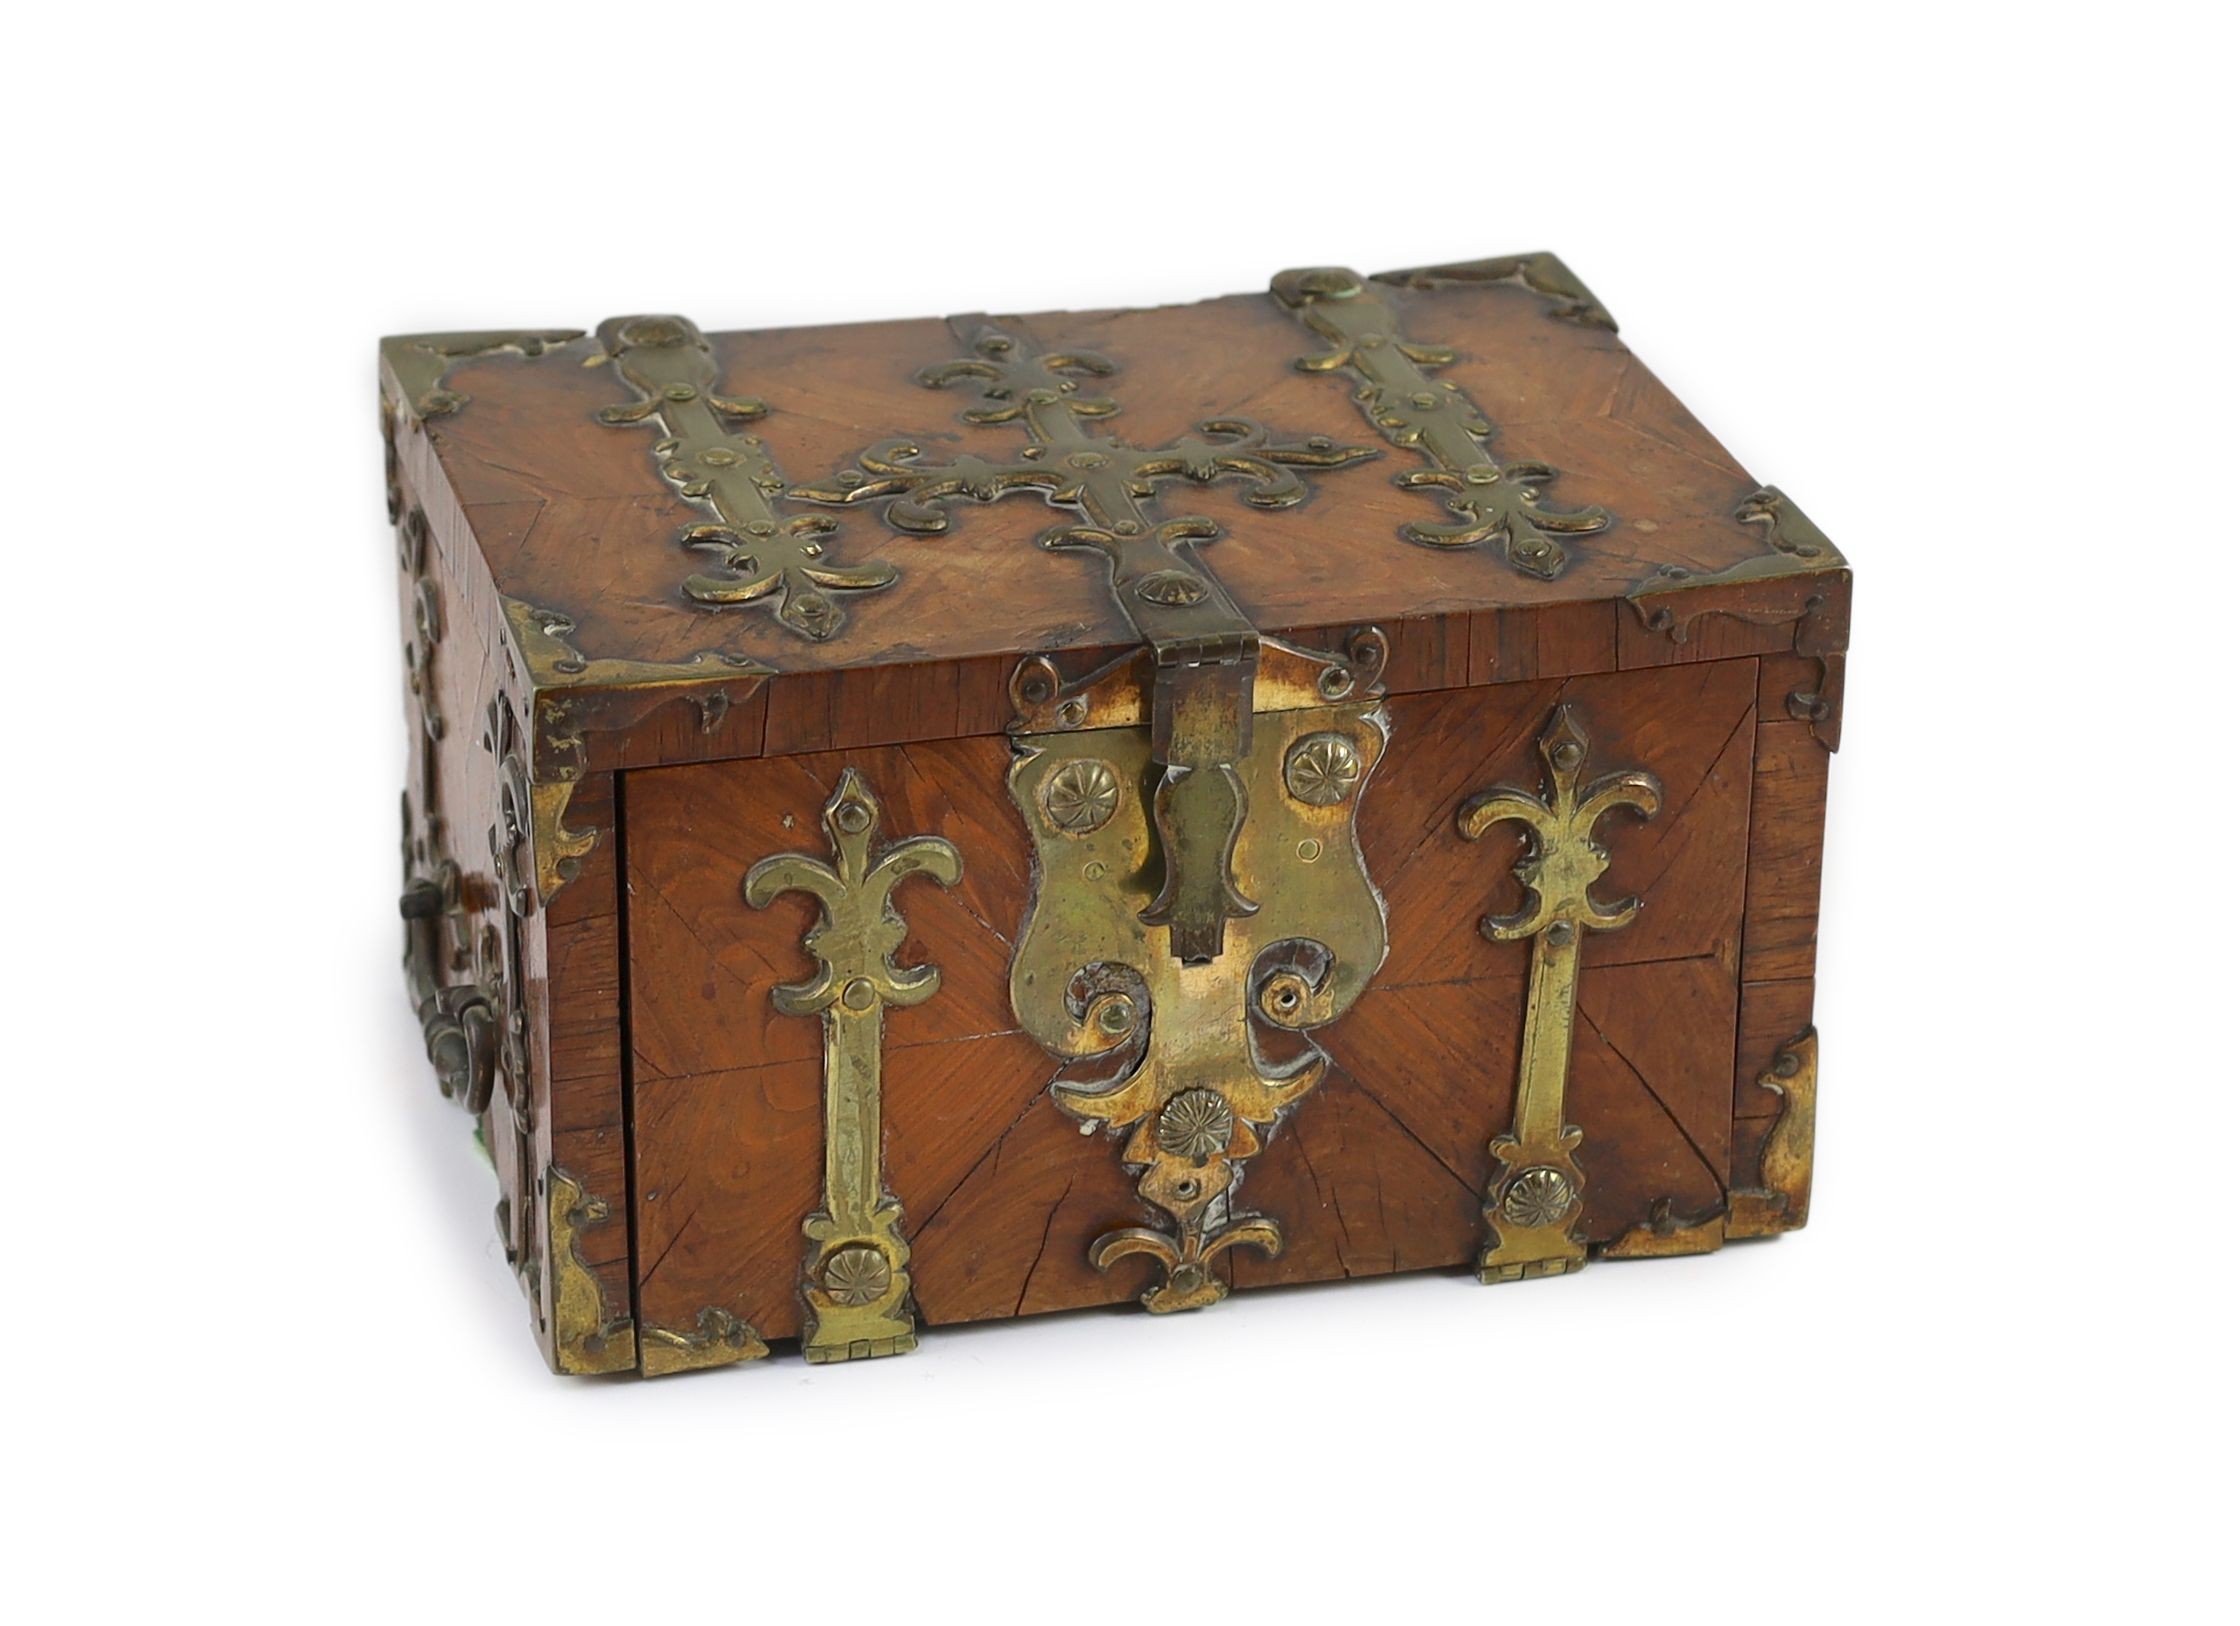 A Louis XIV kingwood and ormolu mounted strong box, c.1700, 28.5 cm wide excluding handles, clasp broken